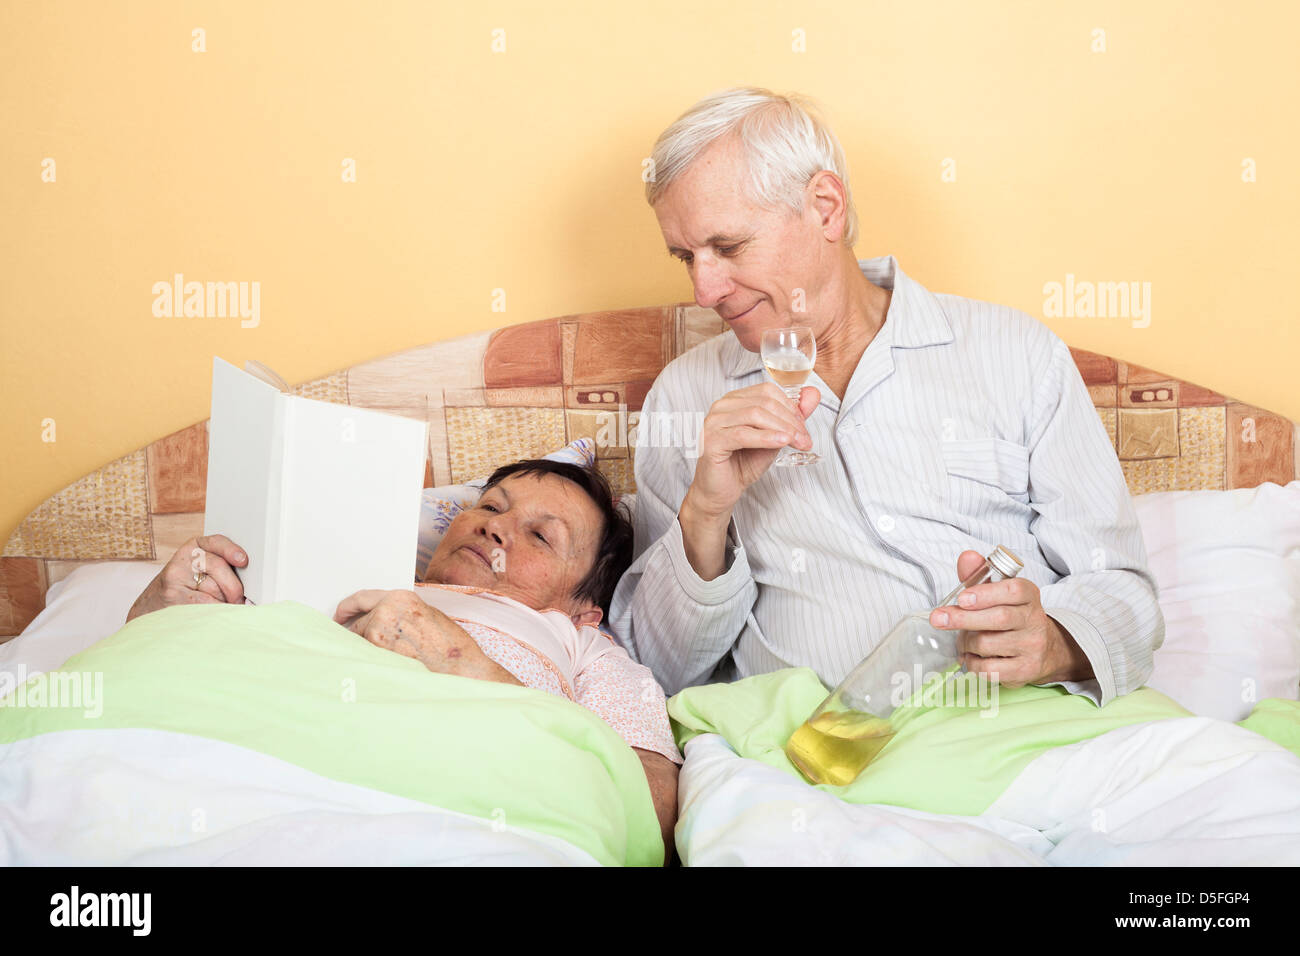 Funny senior man drinking alcohol and woman reading book in bed Stock Photo